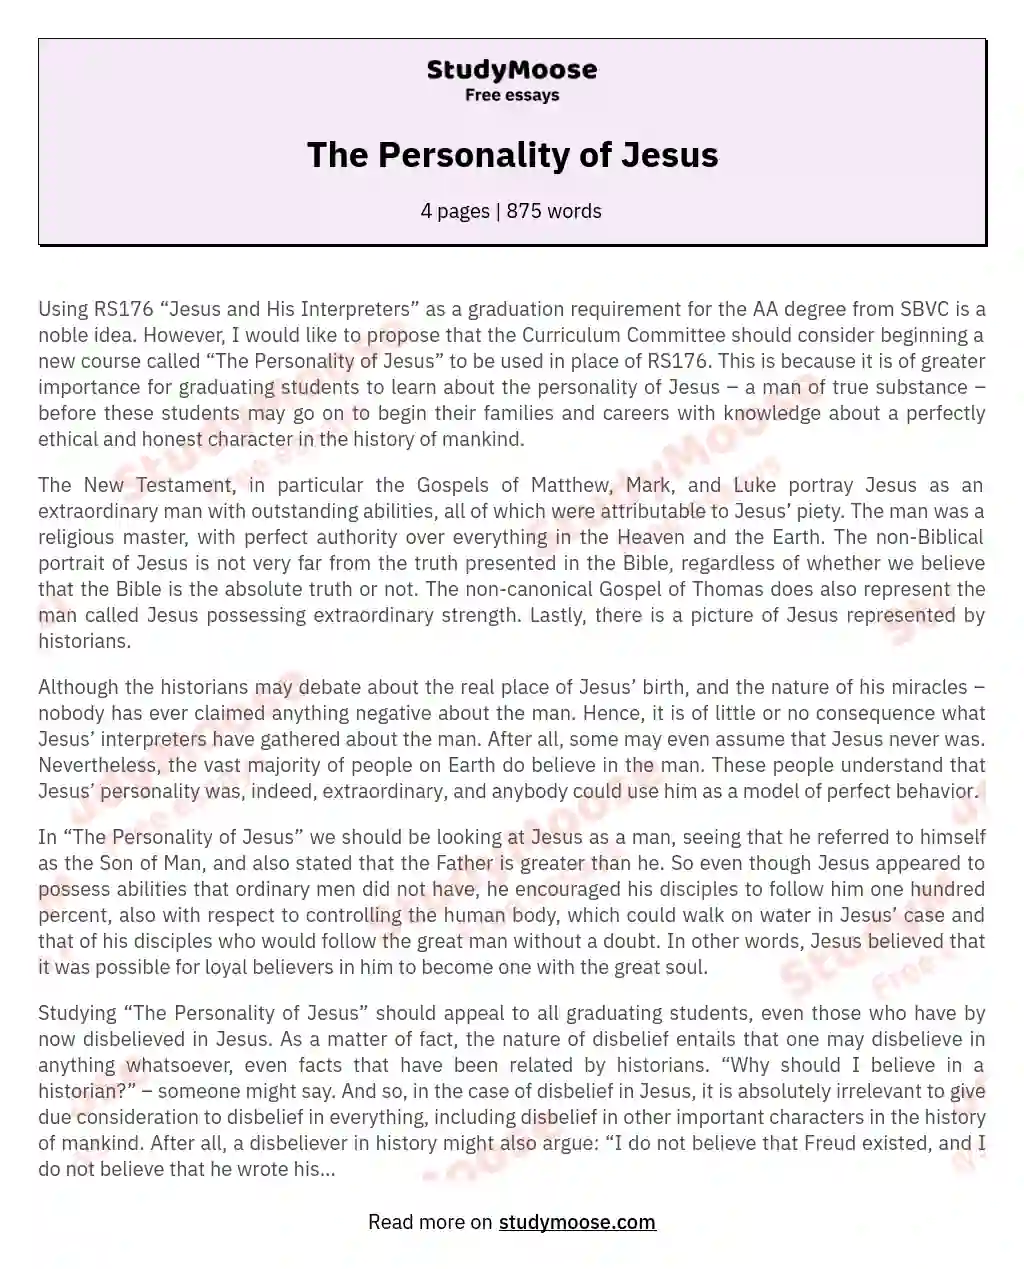 The Personality of Jesus essay